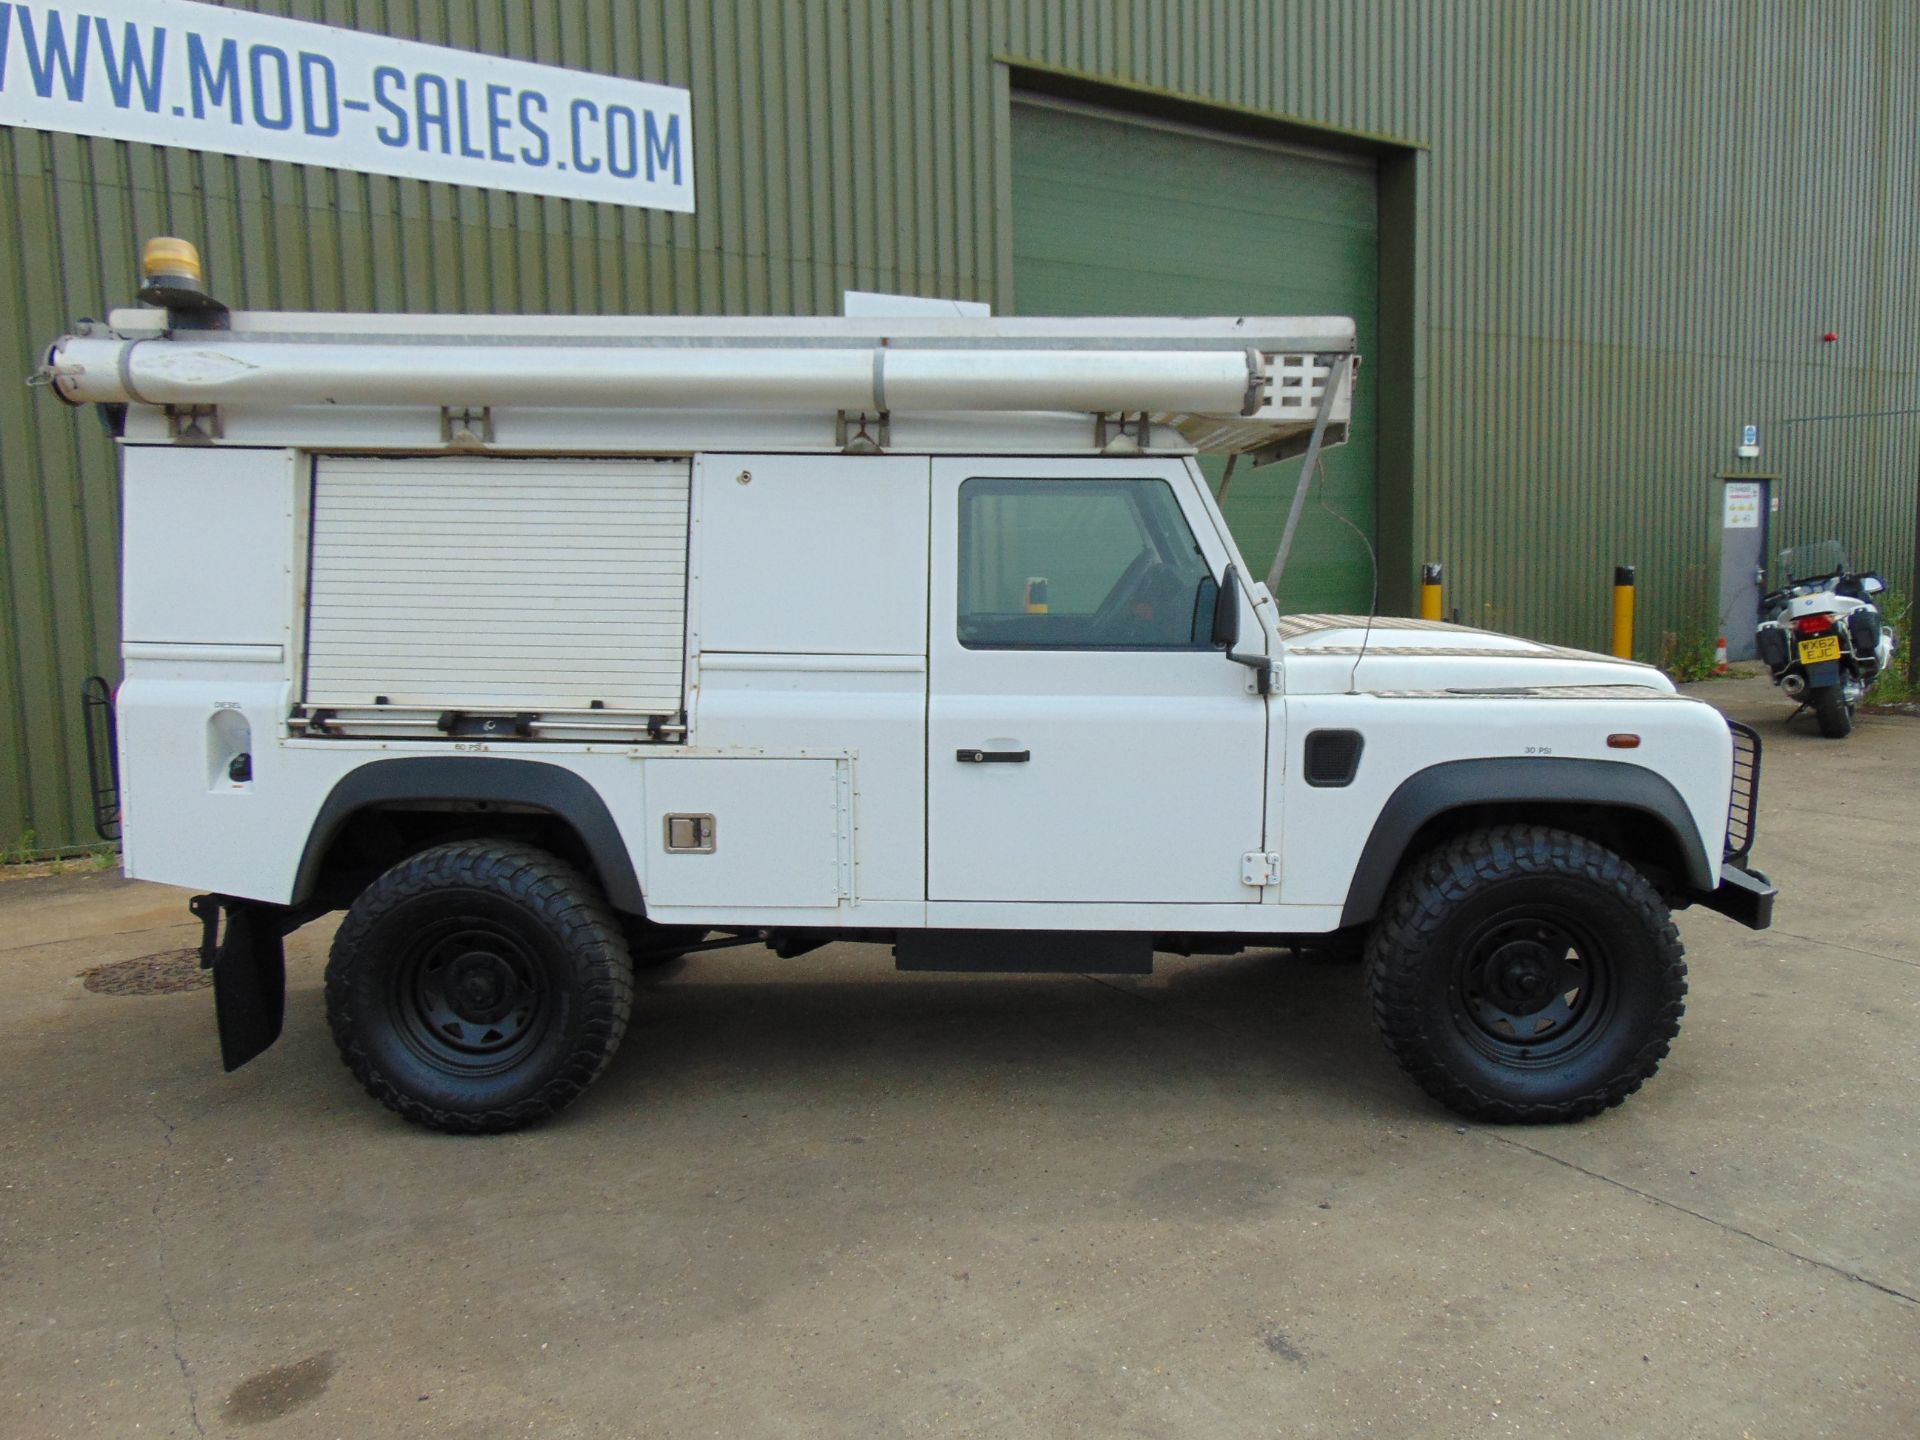 2013 Land Rover Defender 110 Puma hardtop 4x4 Utility vehicle (mobile workshop) with hydraulic winch - Image 7 of 44